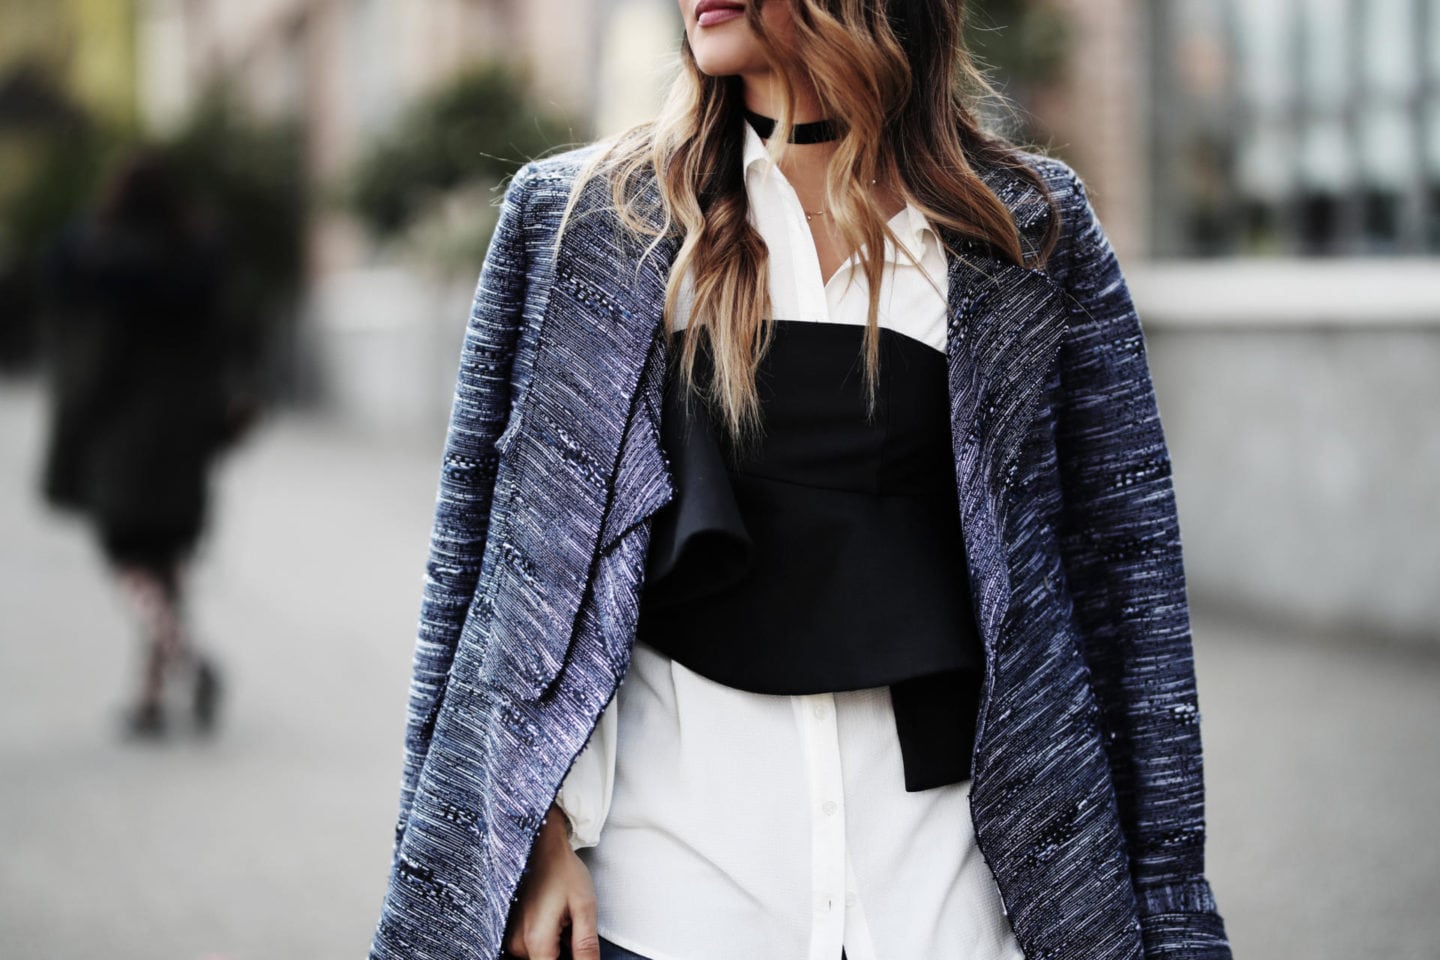 The Cool-Girl Draped Jacket Look - The Girl from Panama